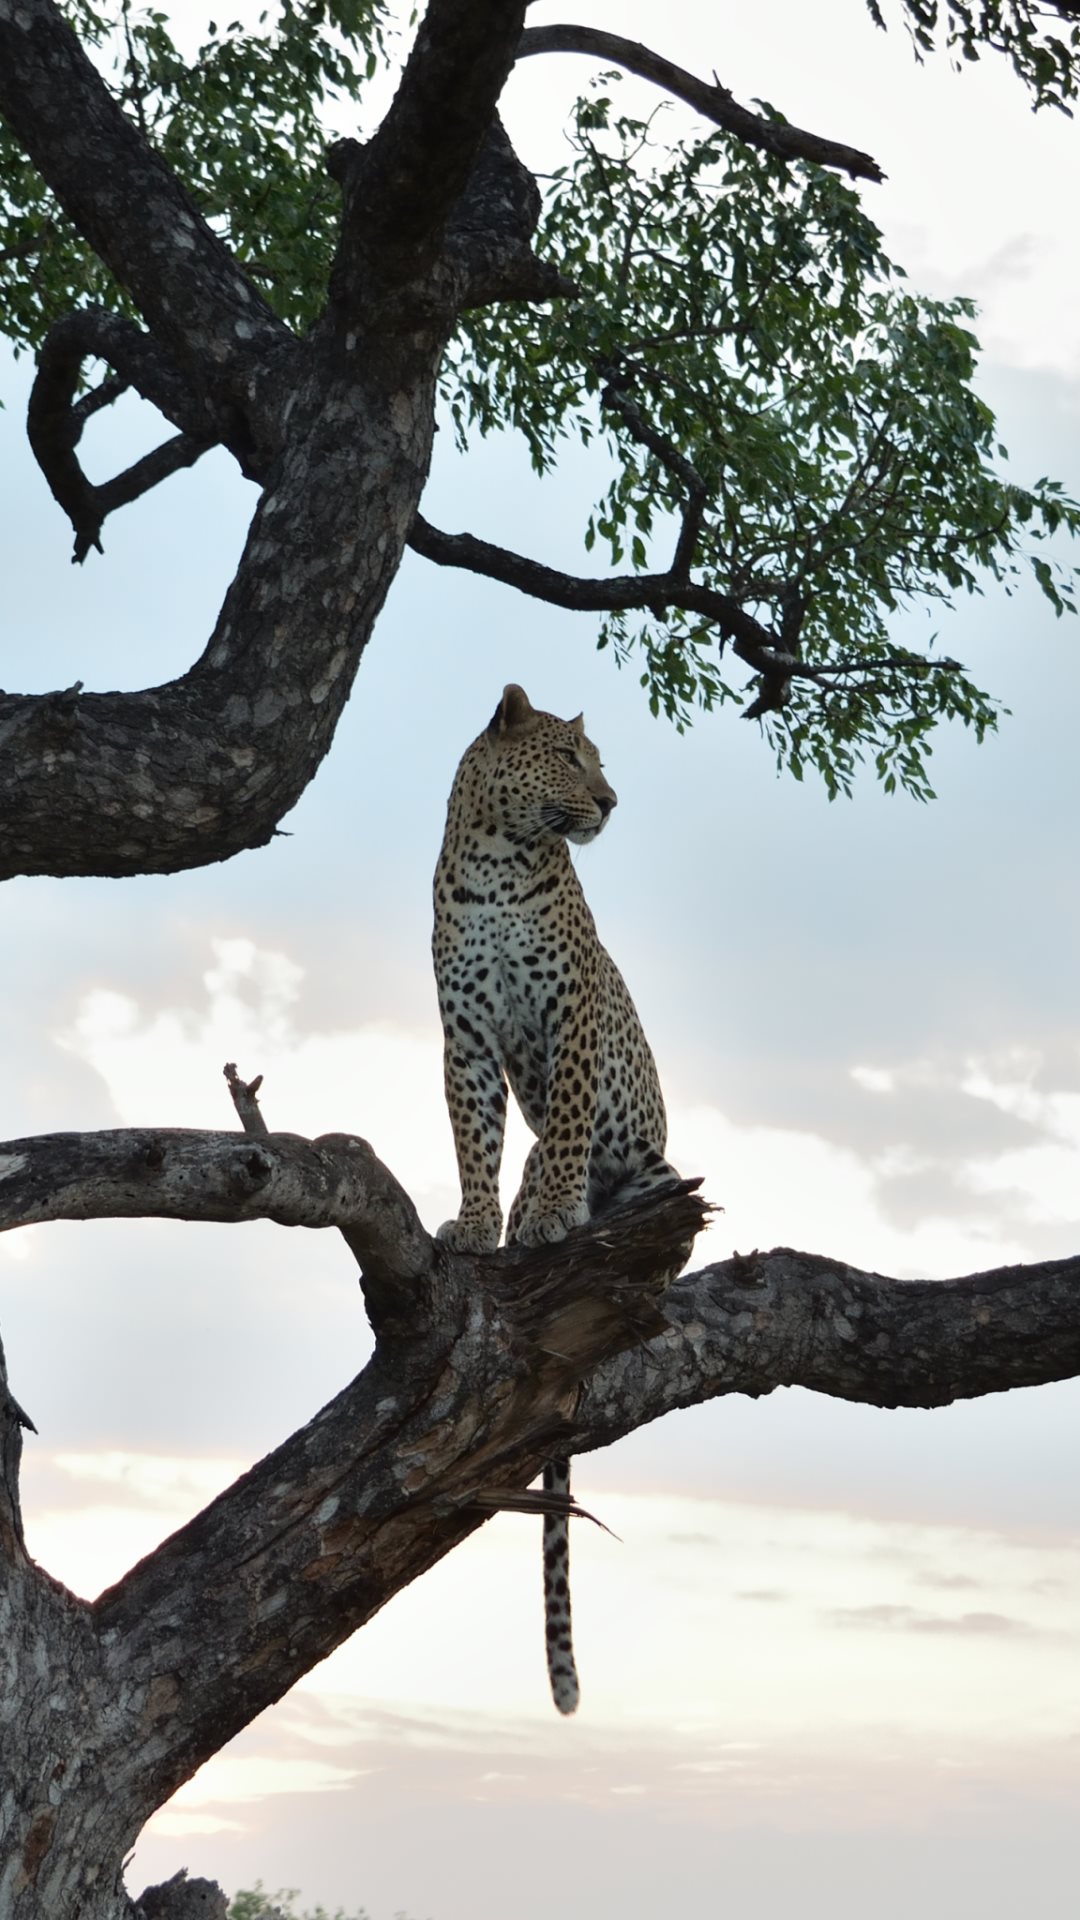 Leopard watching from tree for Samsung Galaxy and iPhone: 1080x1920